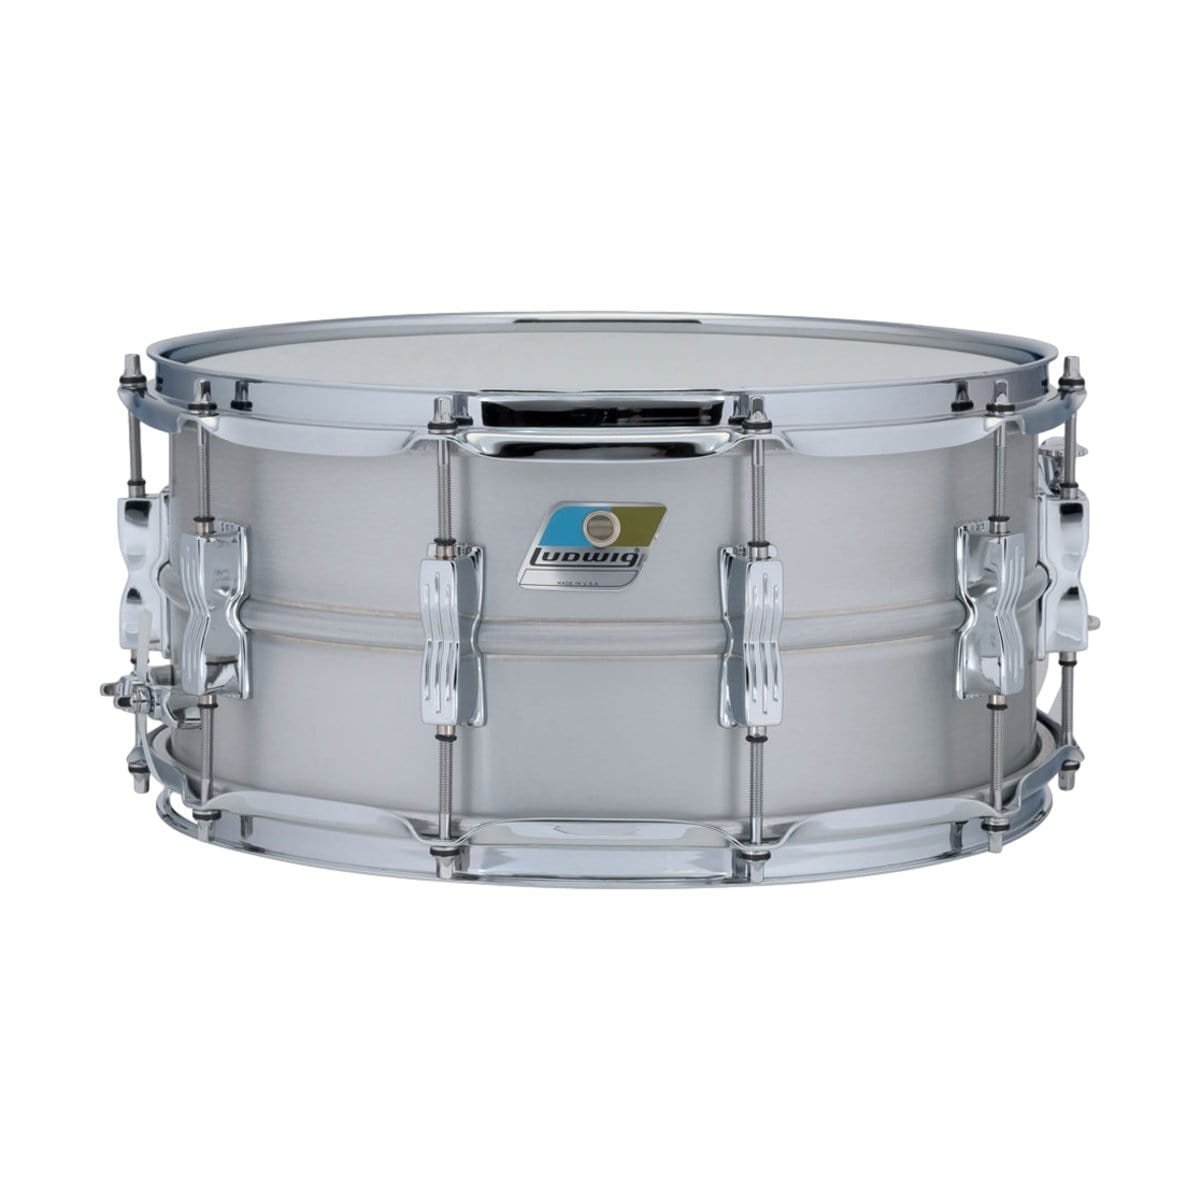 Ludwig Percussion Ludwig Acrolite Snare Drum 6.5 x 14 Inch Smooth Shell LM405C - Byron Music